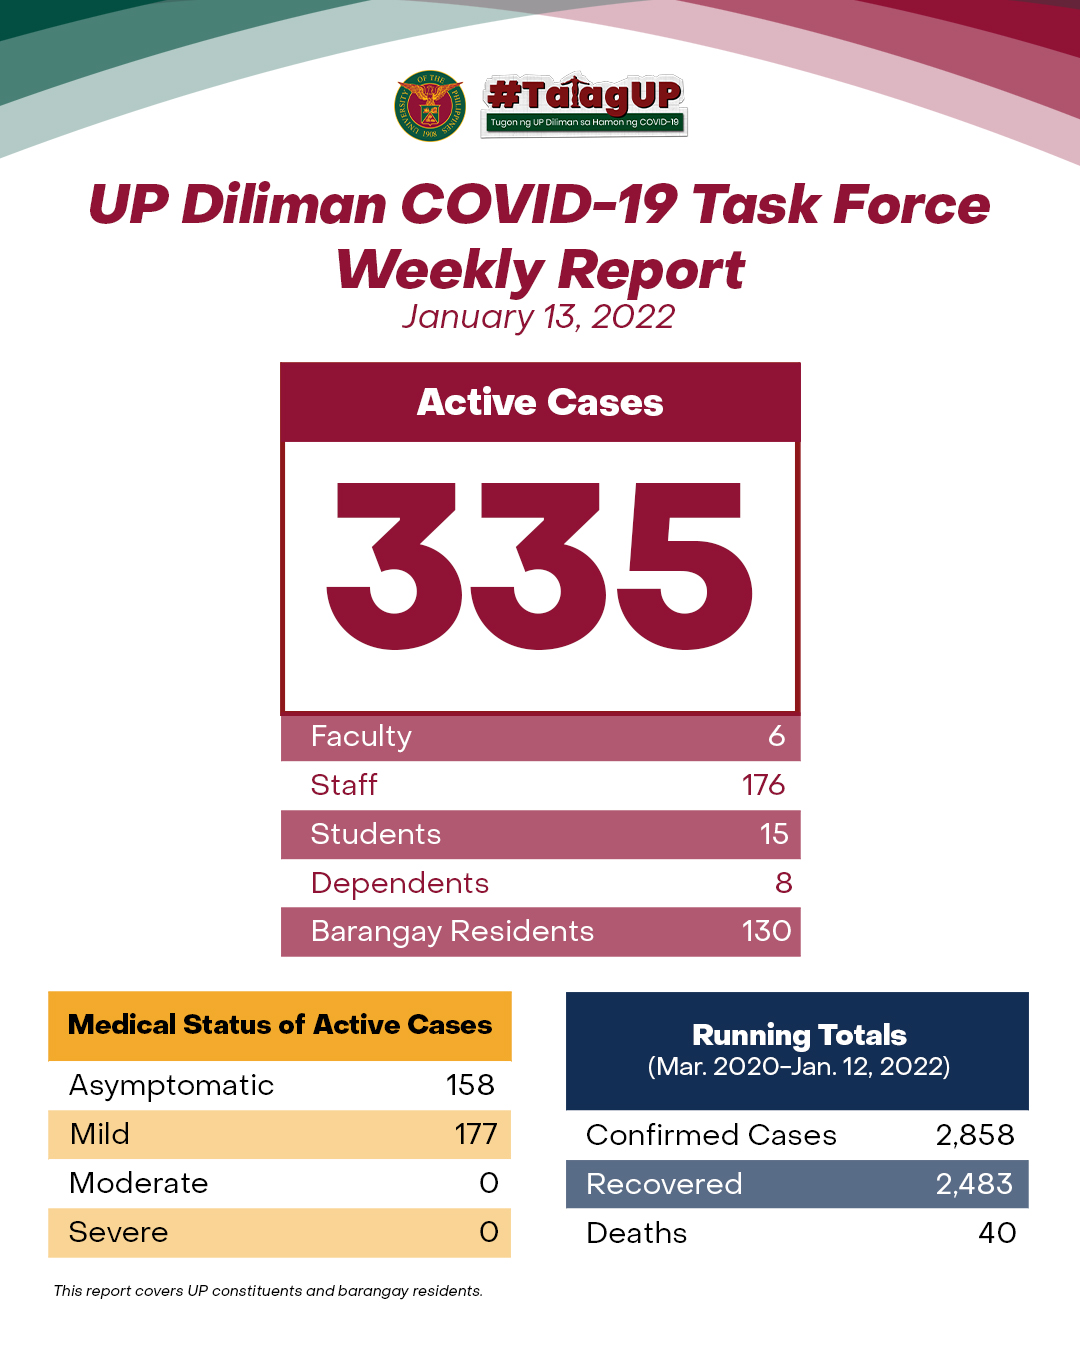 UP Diliman COVID-19 Task Force Weekly Report (January 13, 2022)